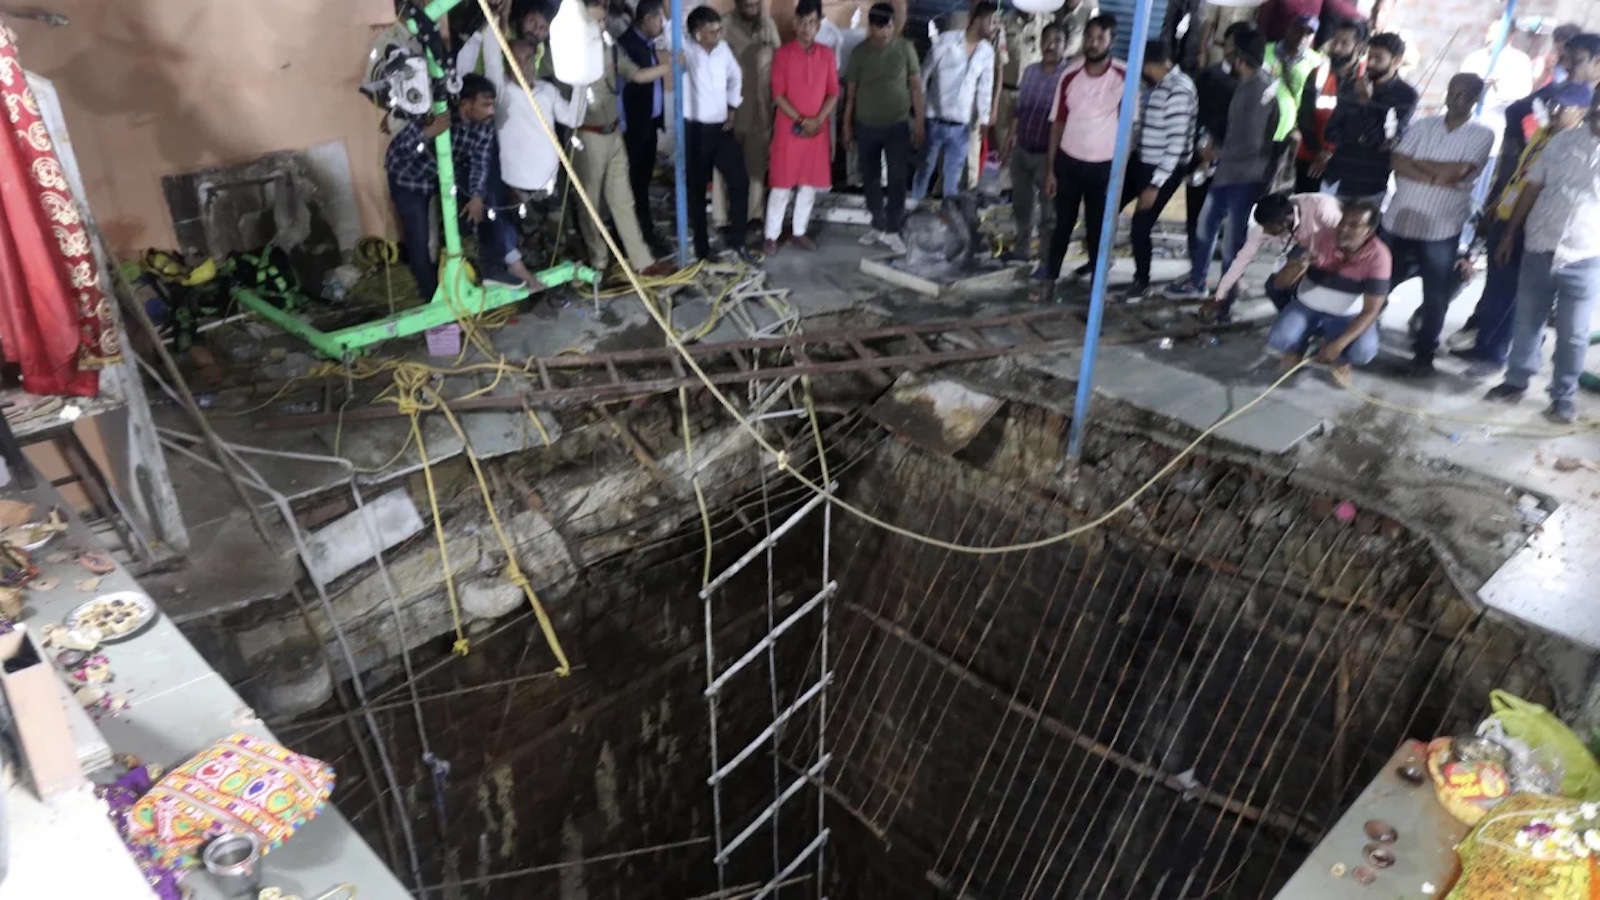 At least 35 people died after falling into an underground well in an Indian temple